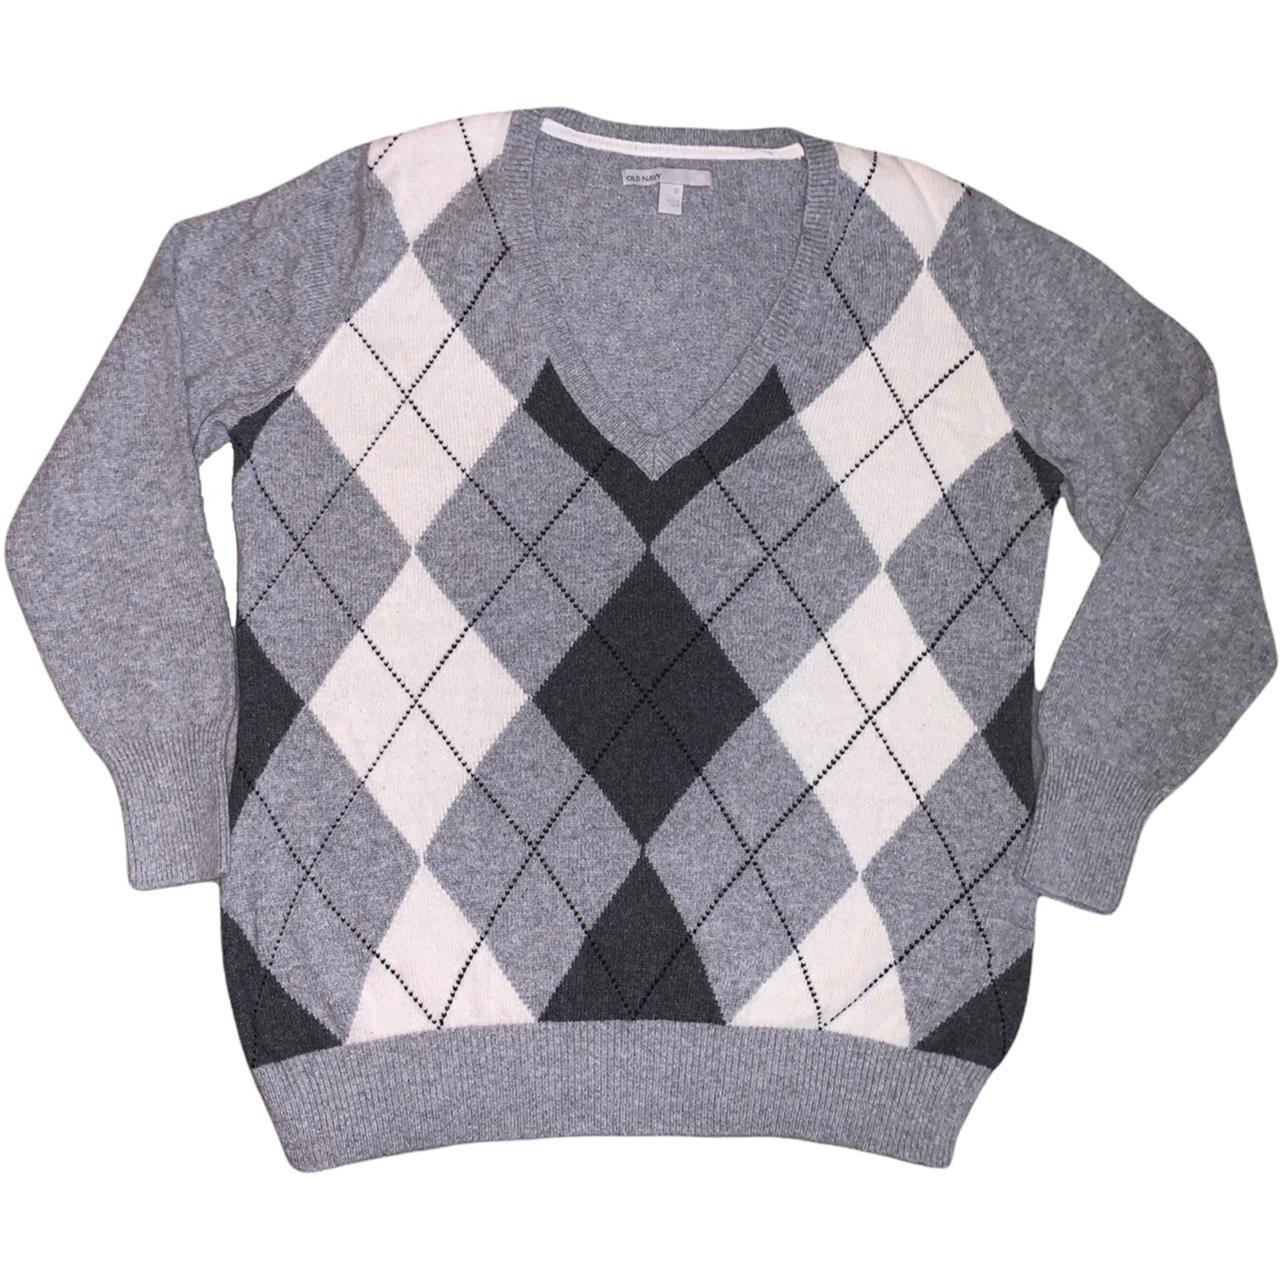 Old Navy Women's Grey and White Jumper